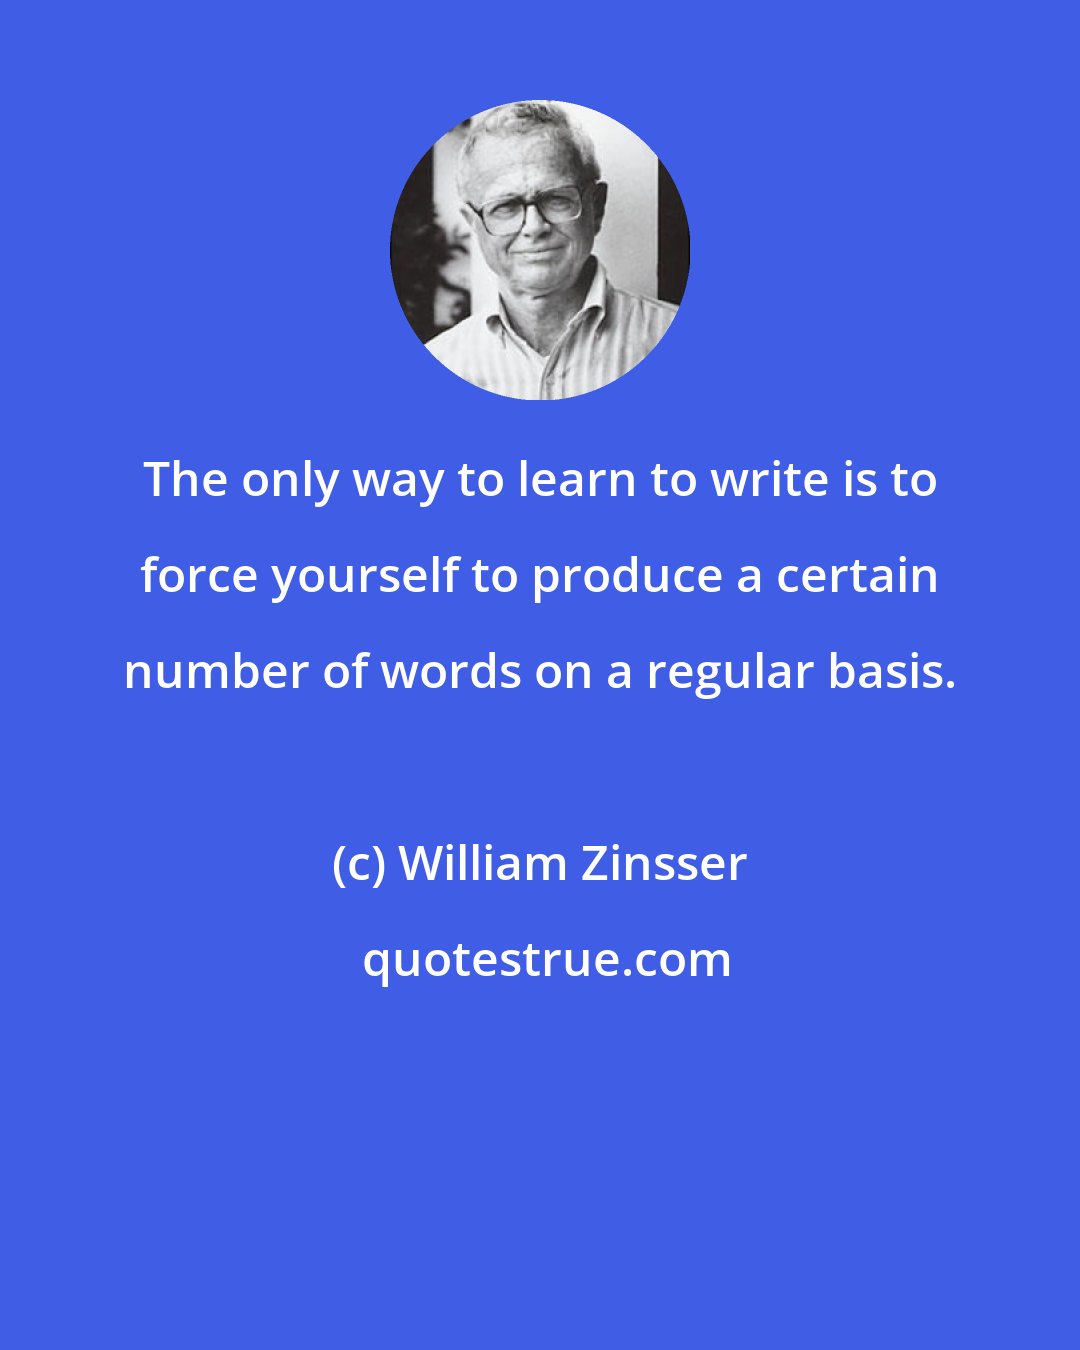 William Zinsser: The only way to learn to write is to force yourself to produce a certain number of words on a regular basis.